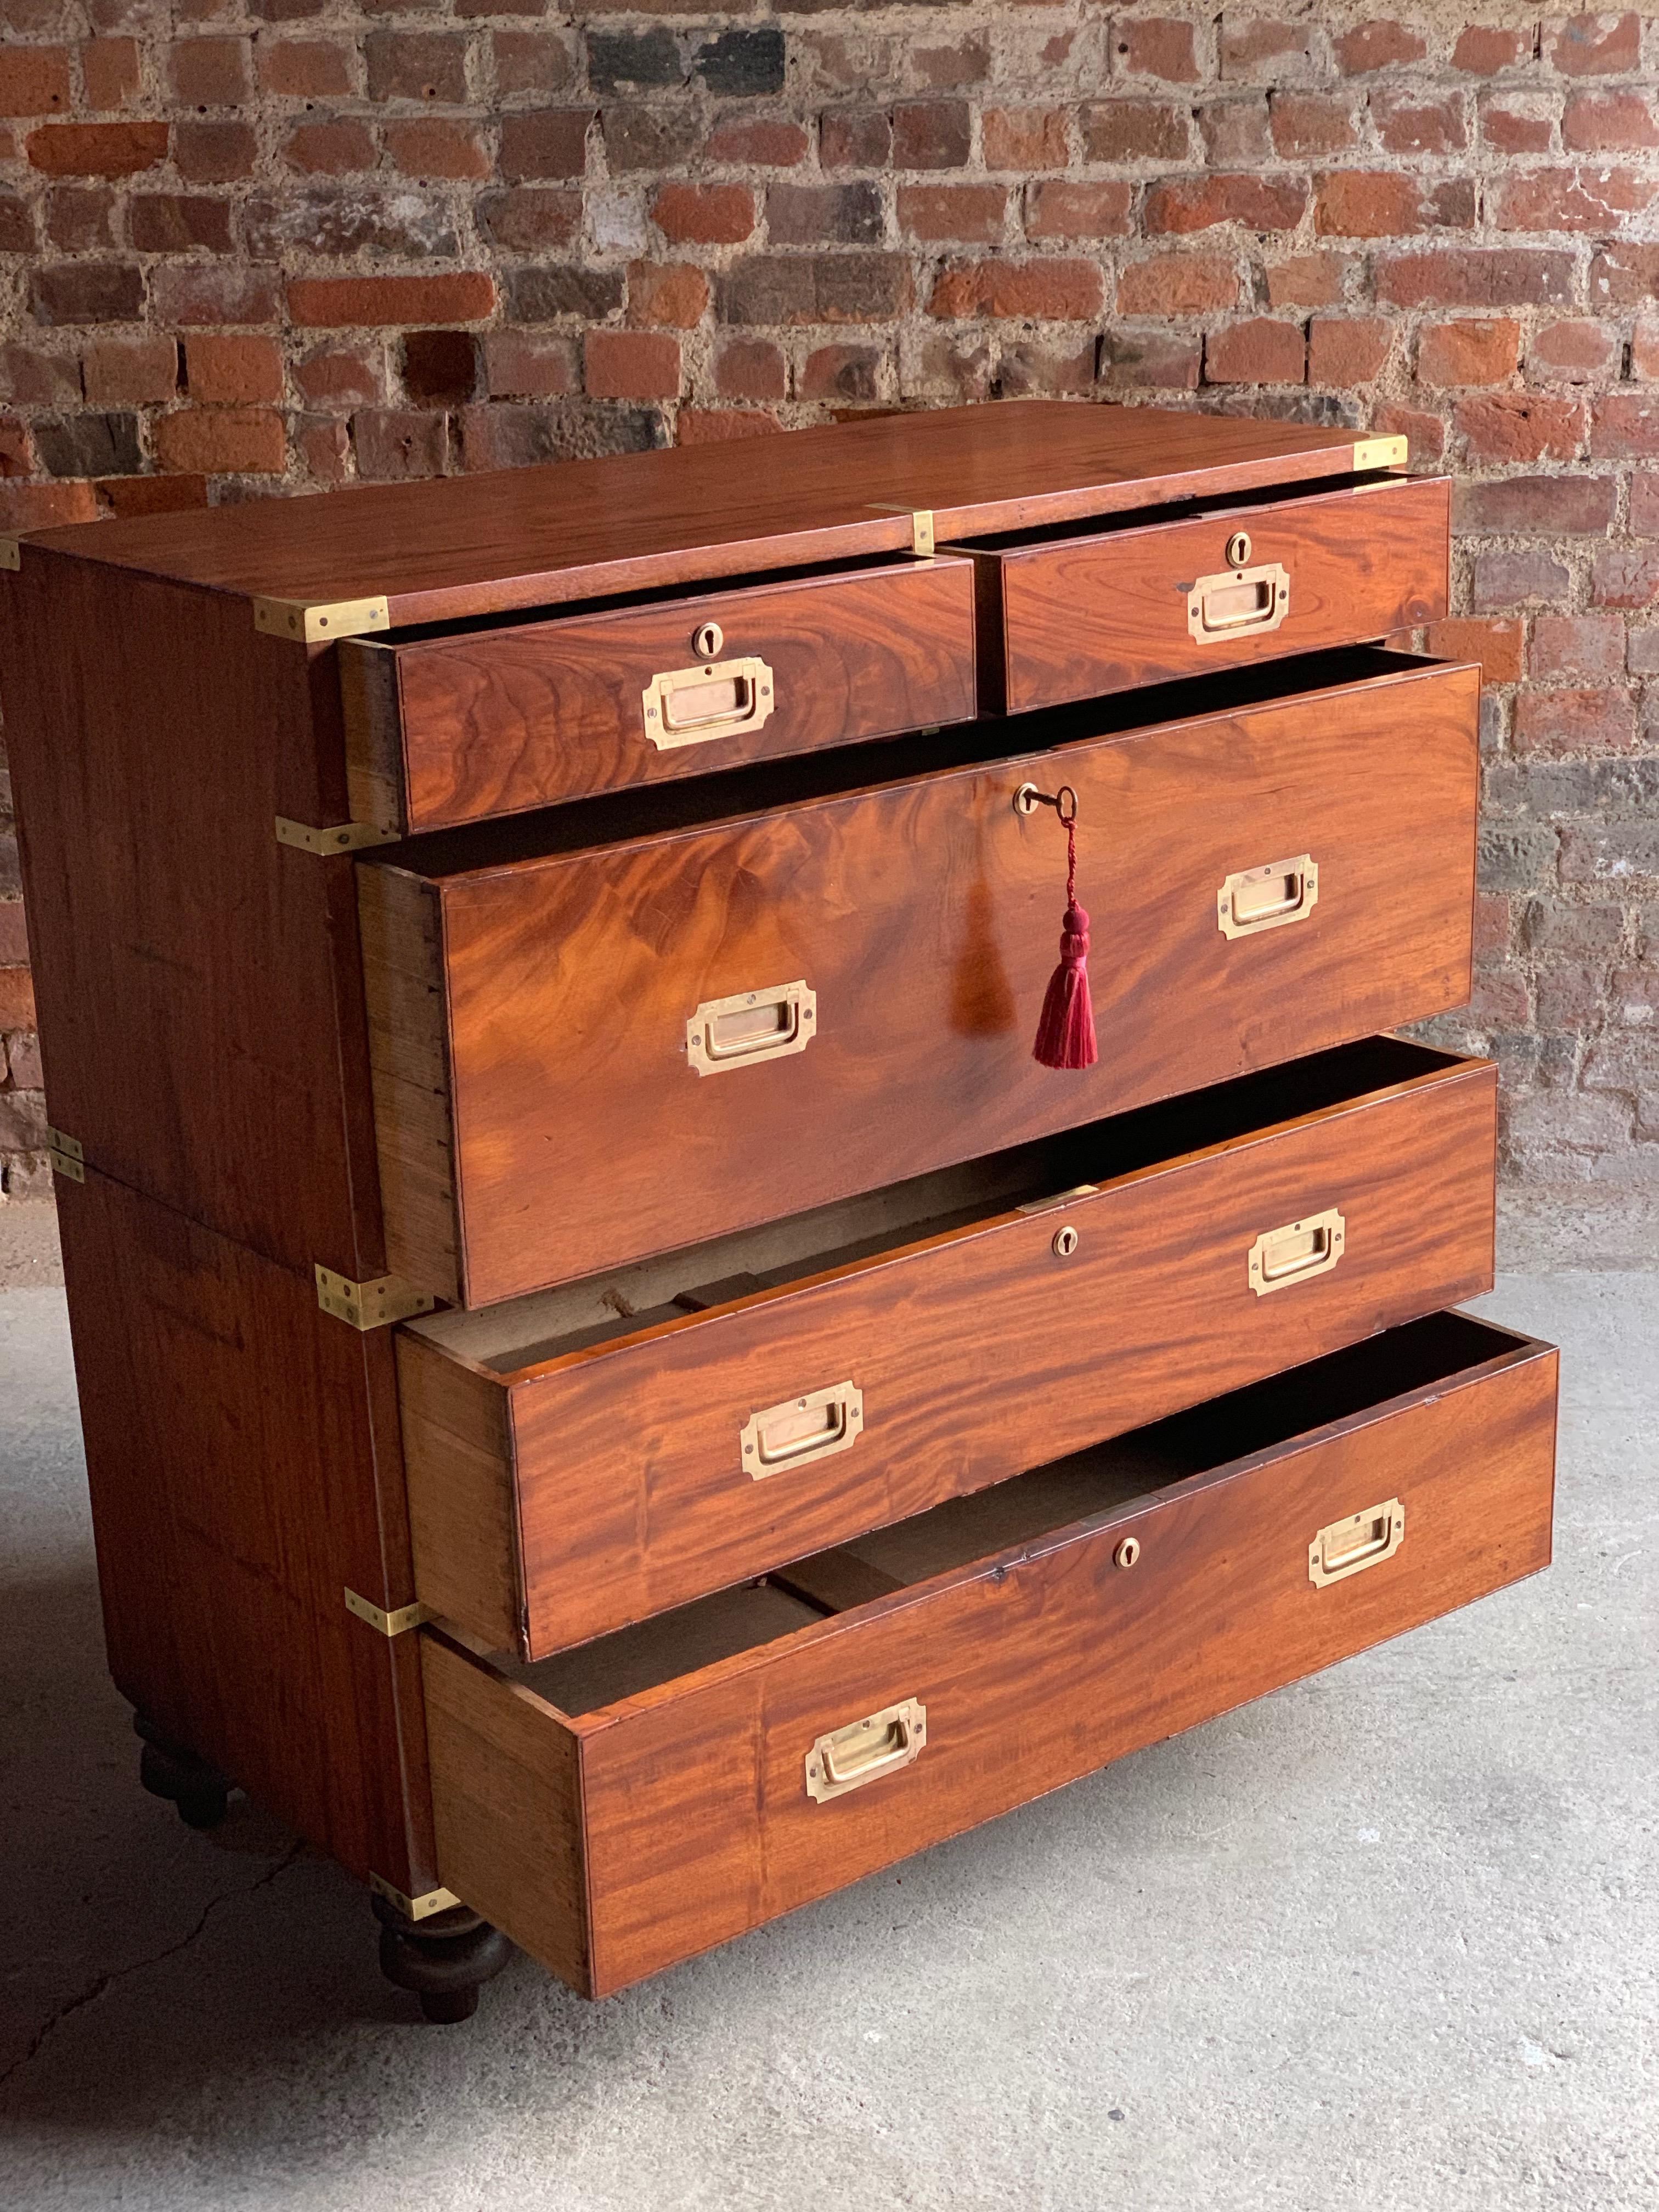 Mid-19th Century Antique Campaign Chest of Drawers Mahogany Military Victorian No.12, circa 1850